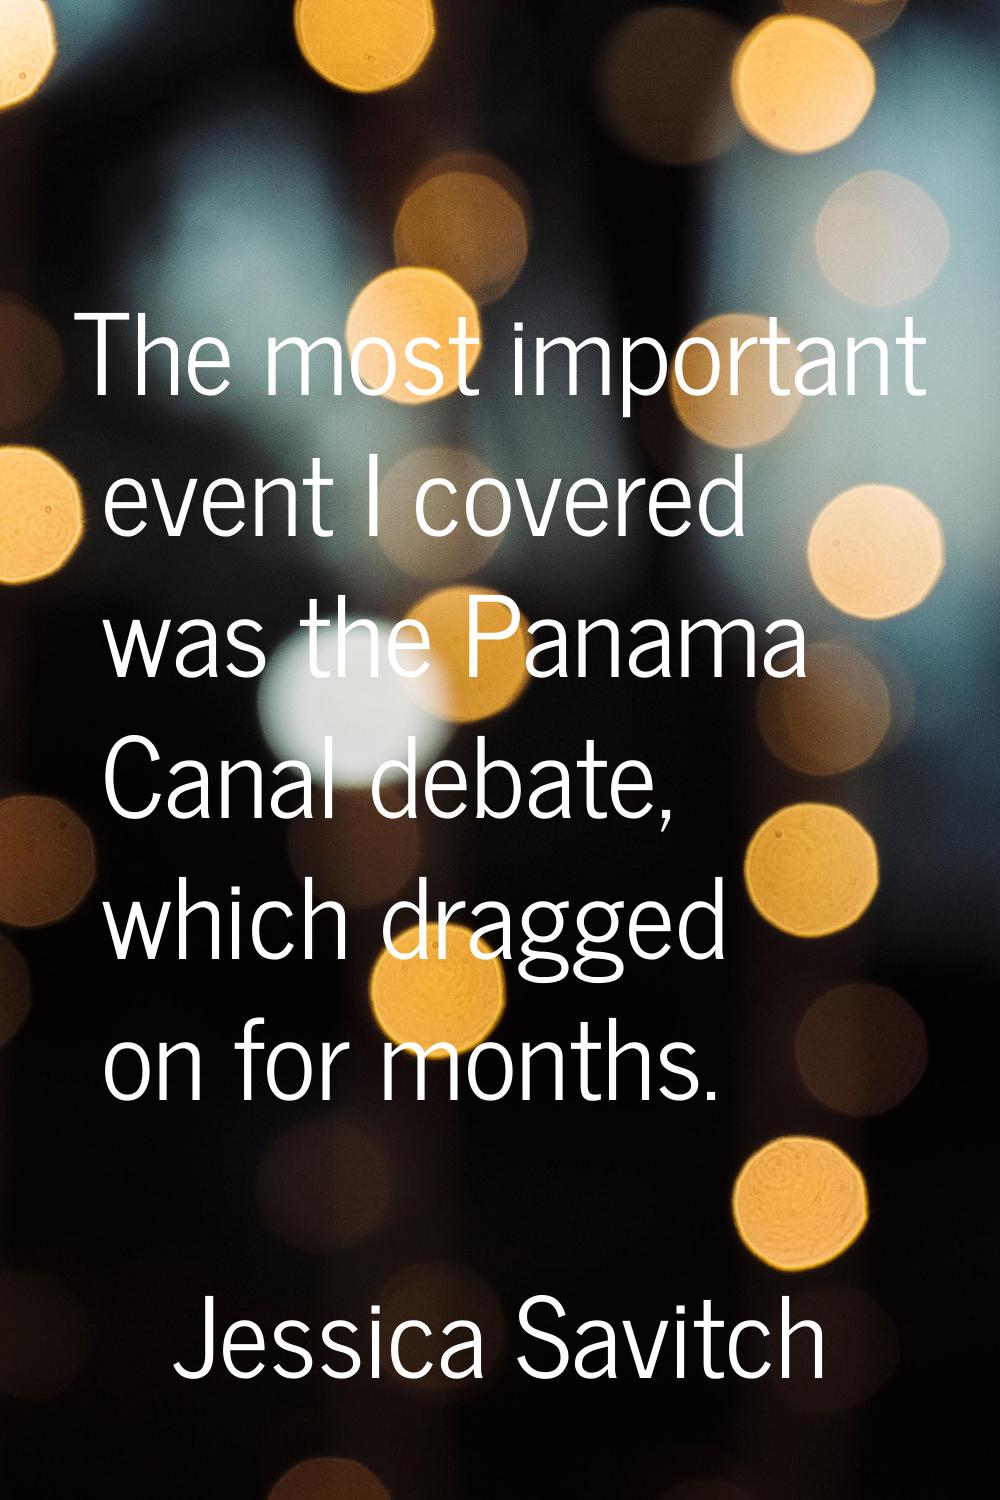 The most important event I covered was the Panama Canal debate, which dragged on for months.